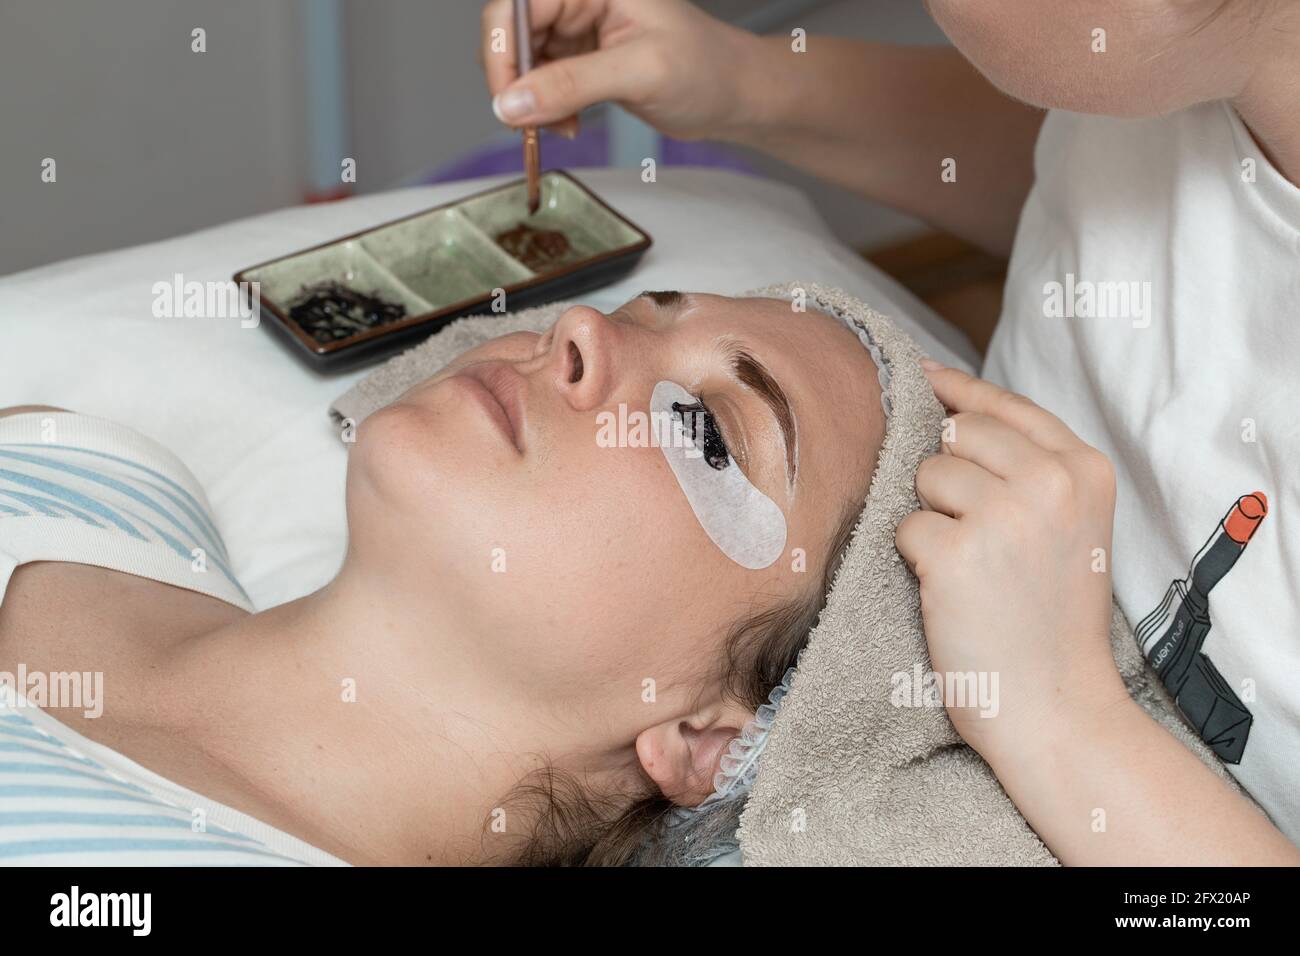 Coloring the eyebrows and eyelashes with henna in a beauty salon. Stock Photo